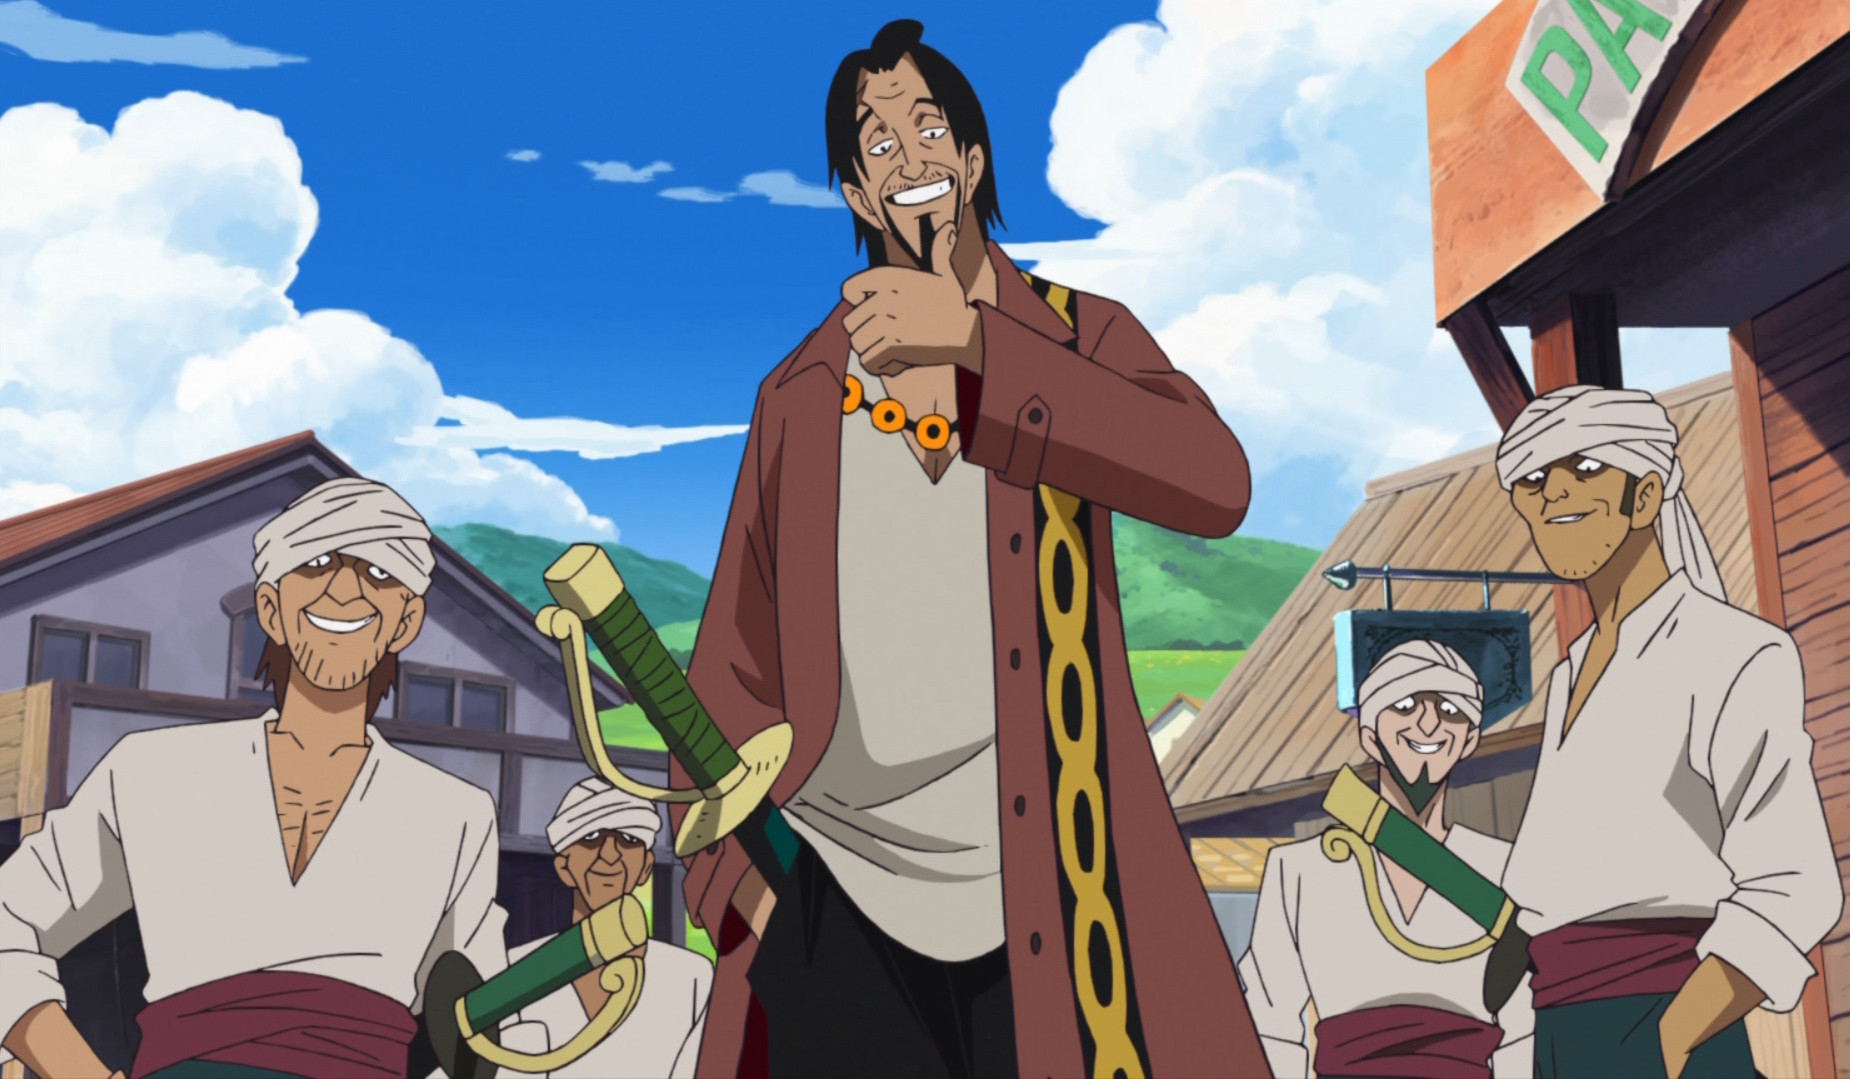 https://static.wikia.nocookie.net/onepiece/images/f/fc/Bandits_Infobox.png/revision/latest?cb=20130621175212